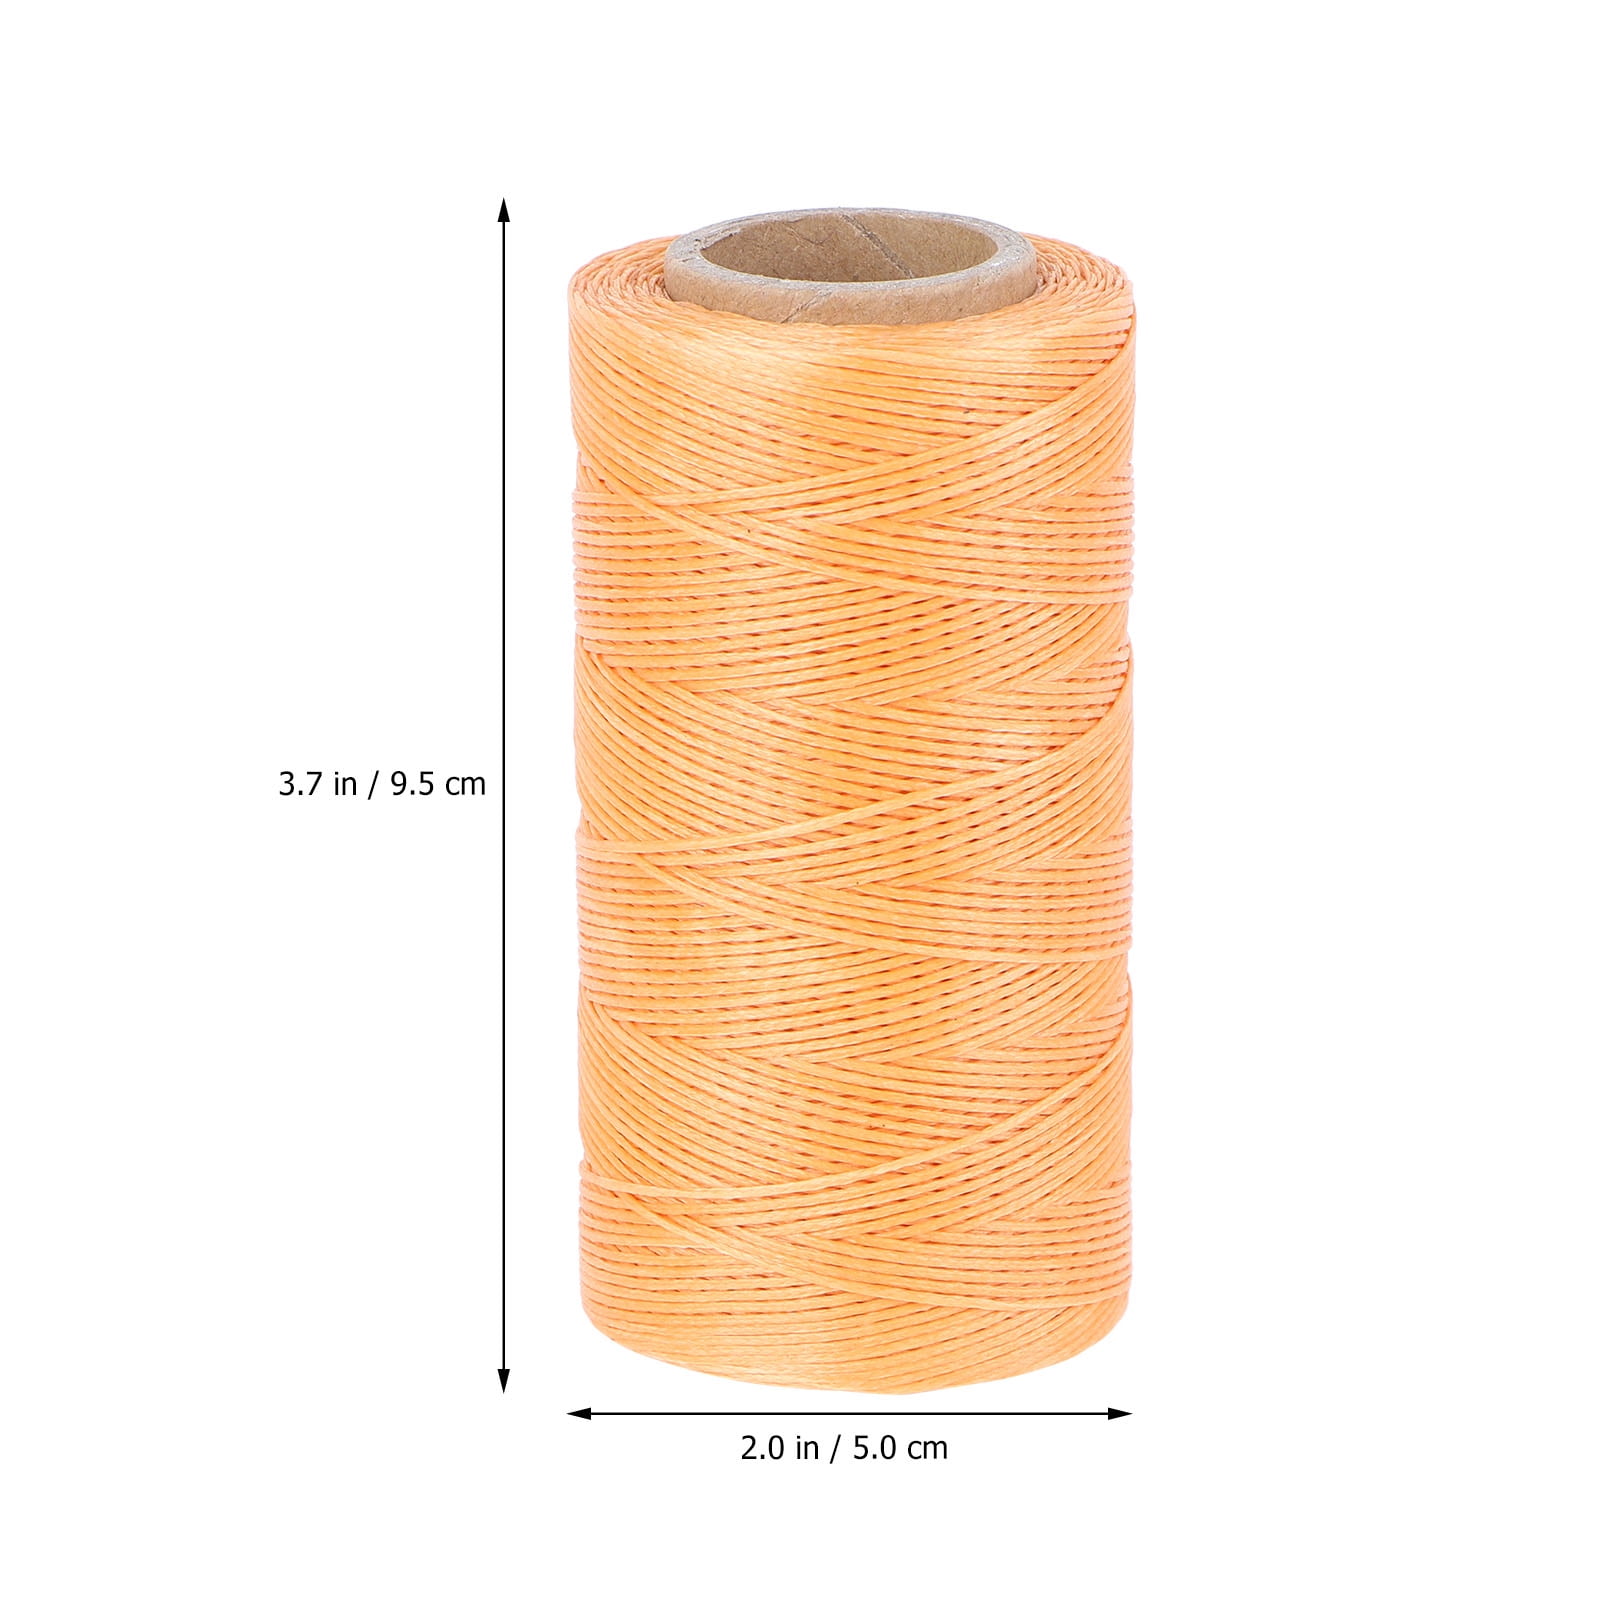 2x 260M 150D 1MM Leather Sewing Waxed Wax Thread Hand Needle Cord Craft DIY  :Cream-Coloured & Light Brown 